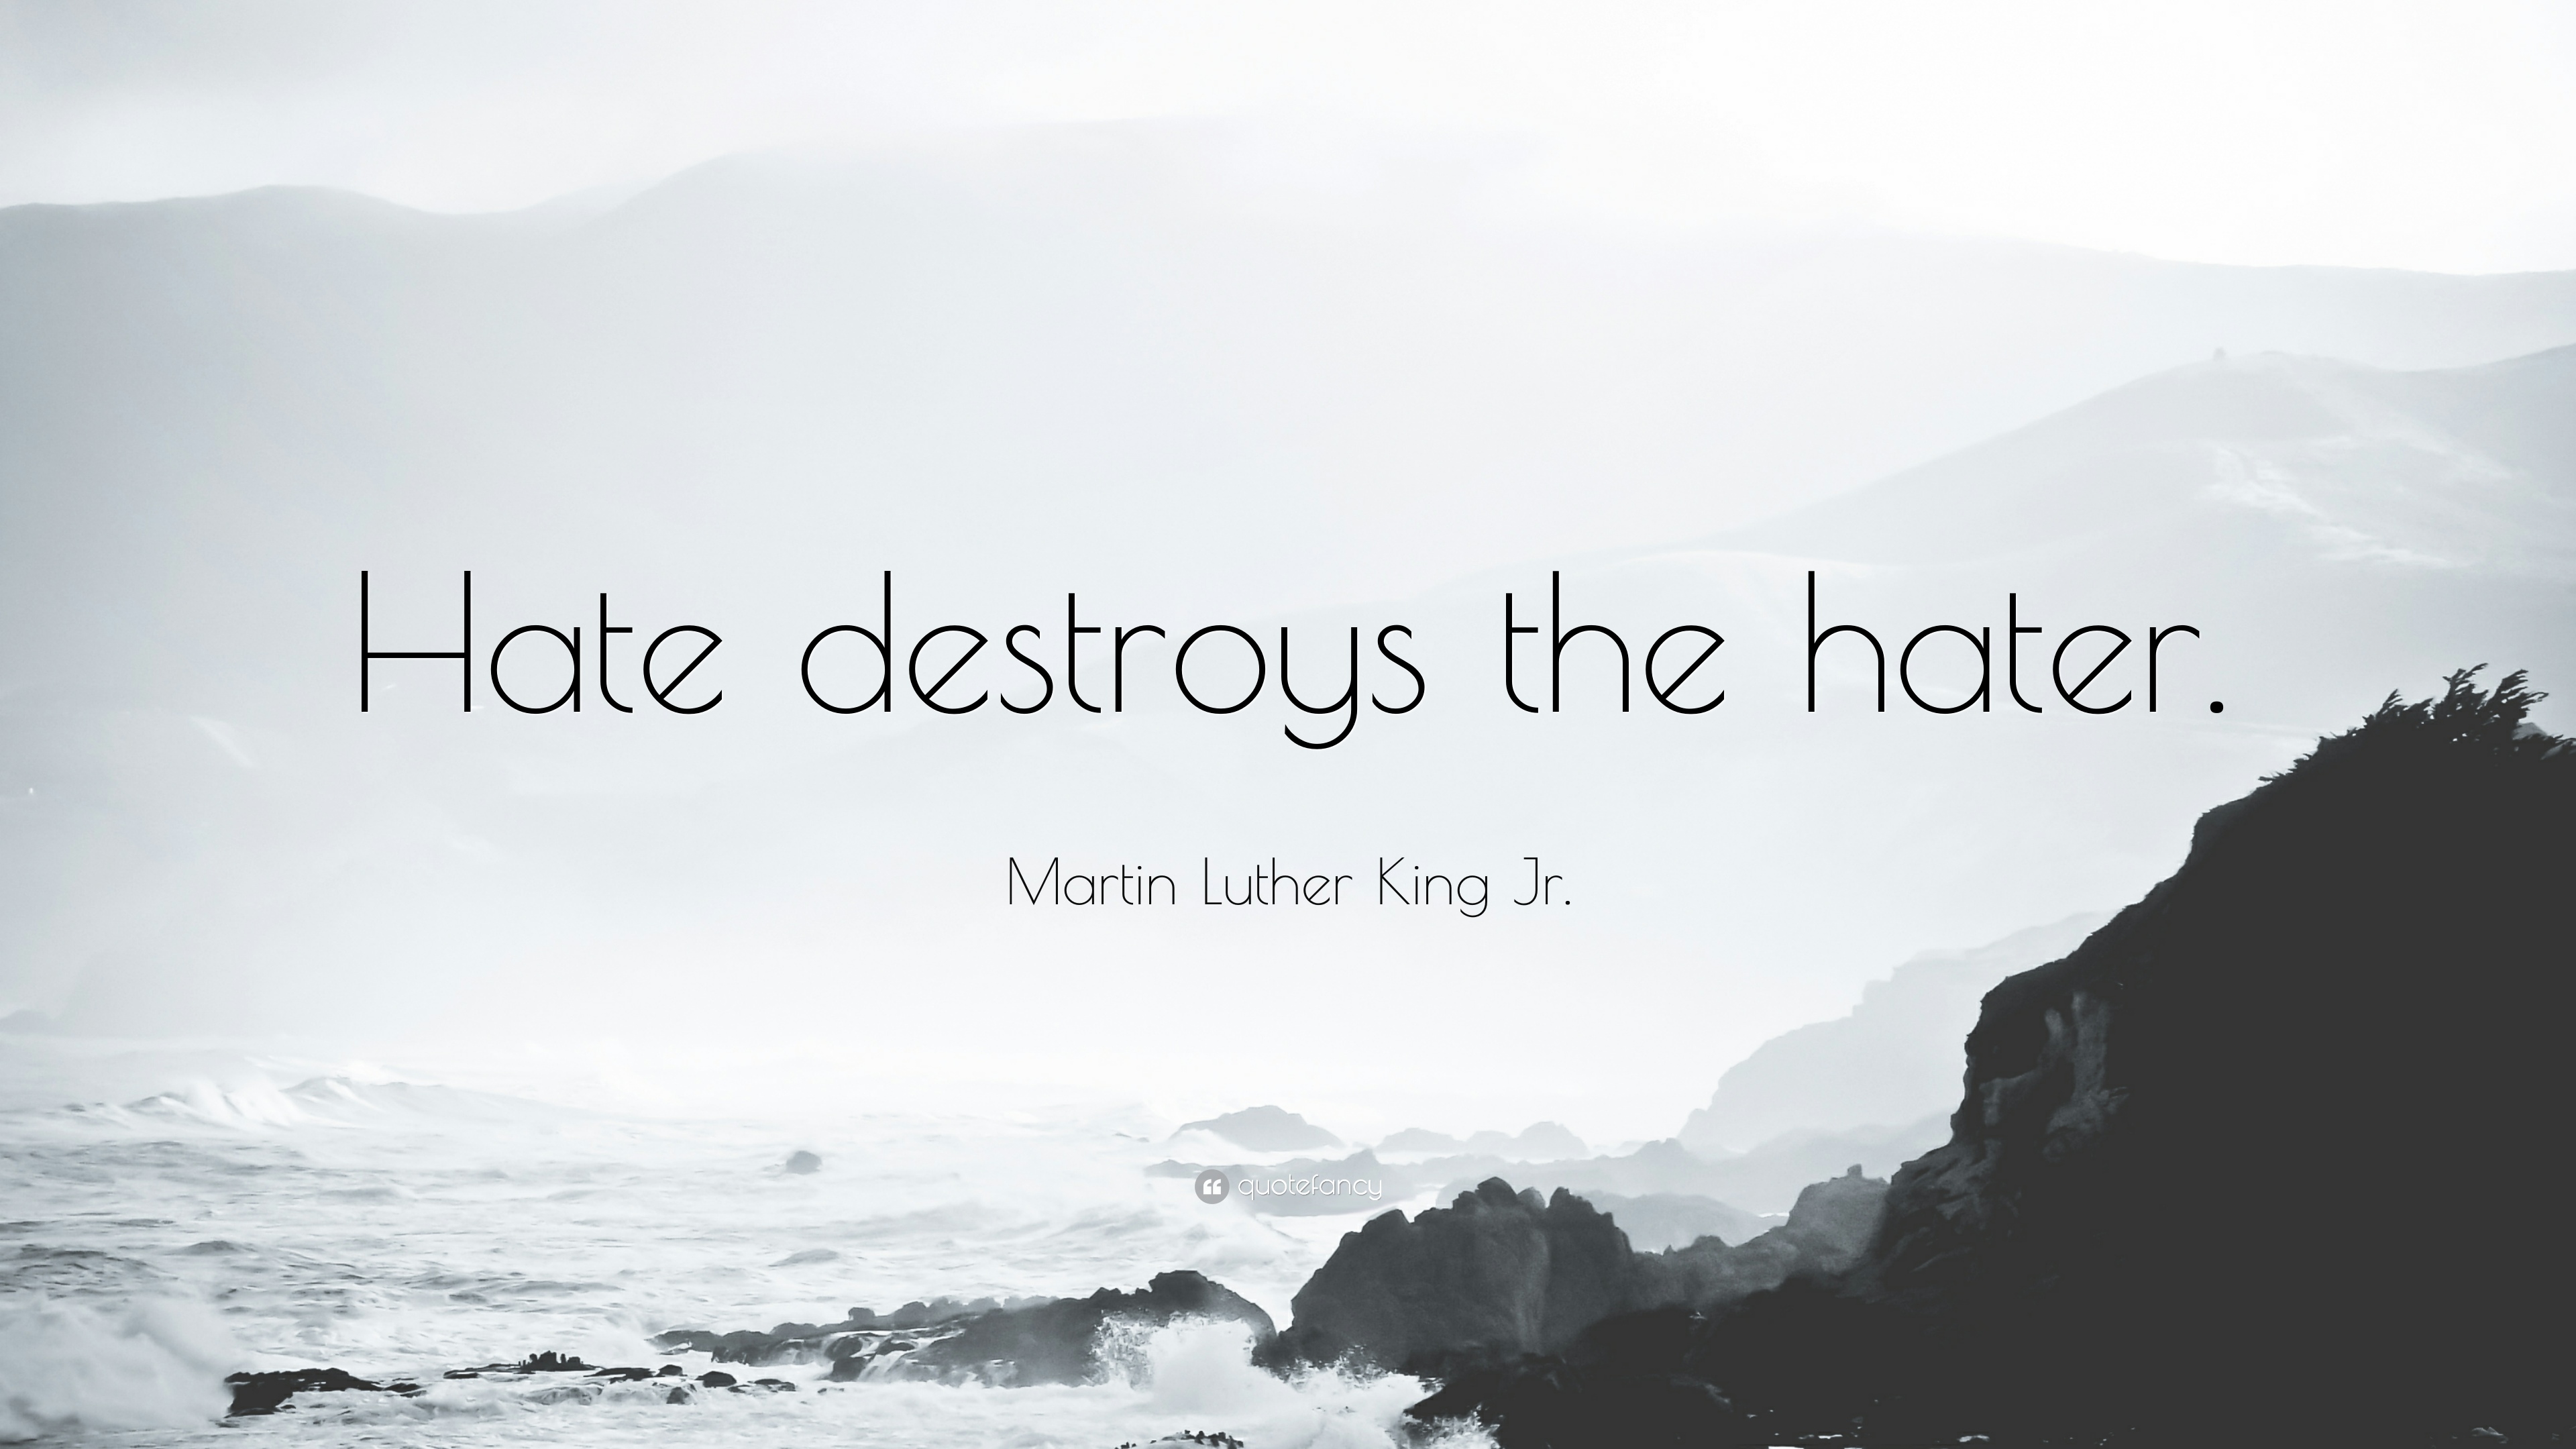 Martin Luther King Jr. Quote: “Hate destroys the hater.” (3 ...